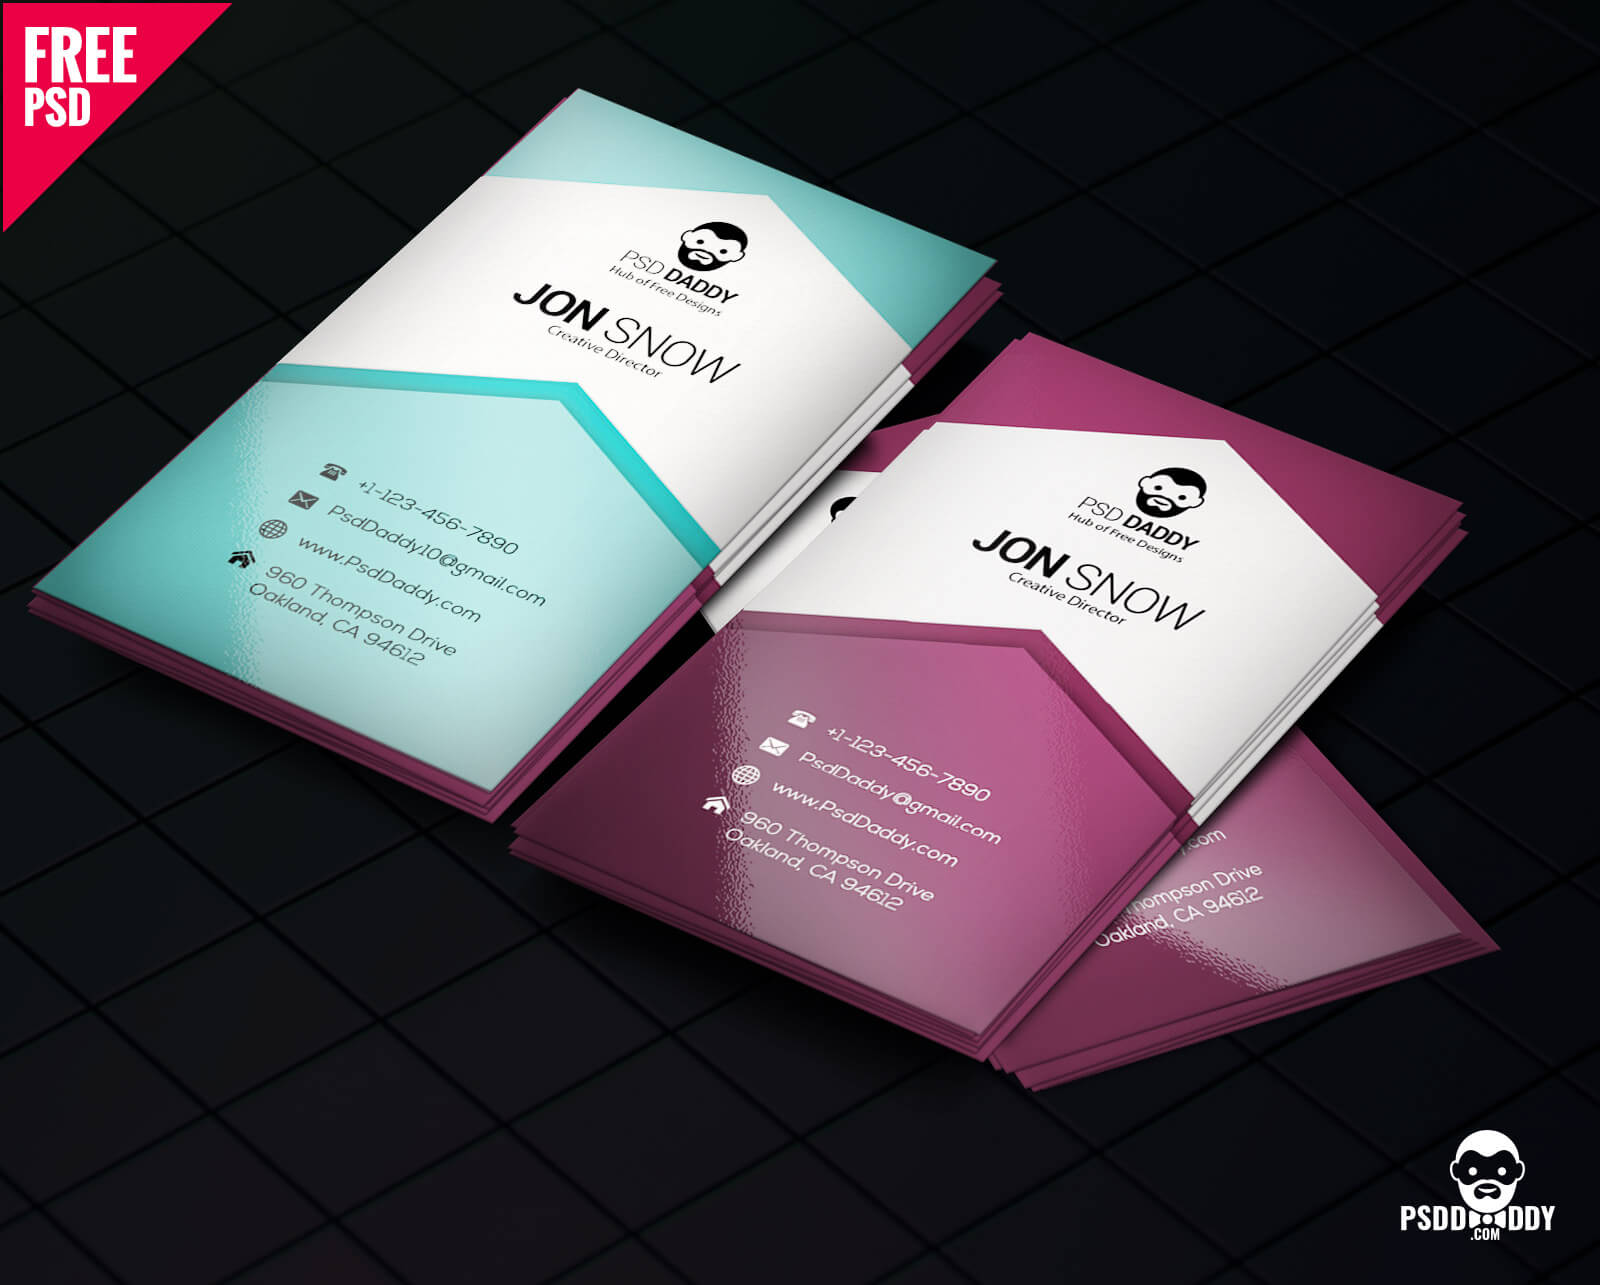 Download]Creative Business Card Psd Free | Psddaddy Within Visiting Card Templates Psd Free Download